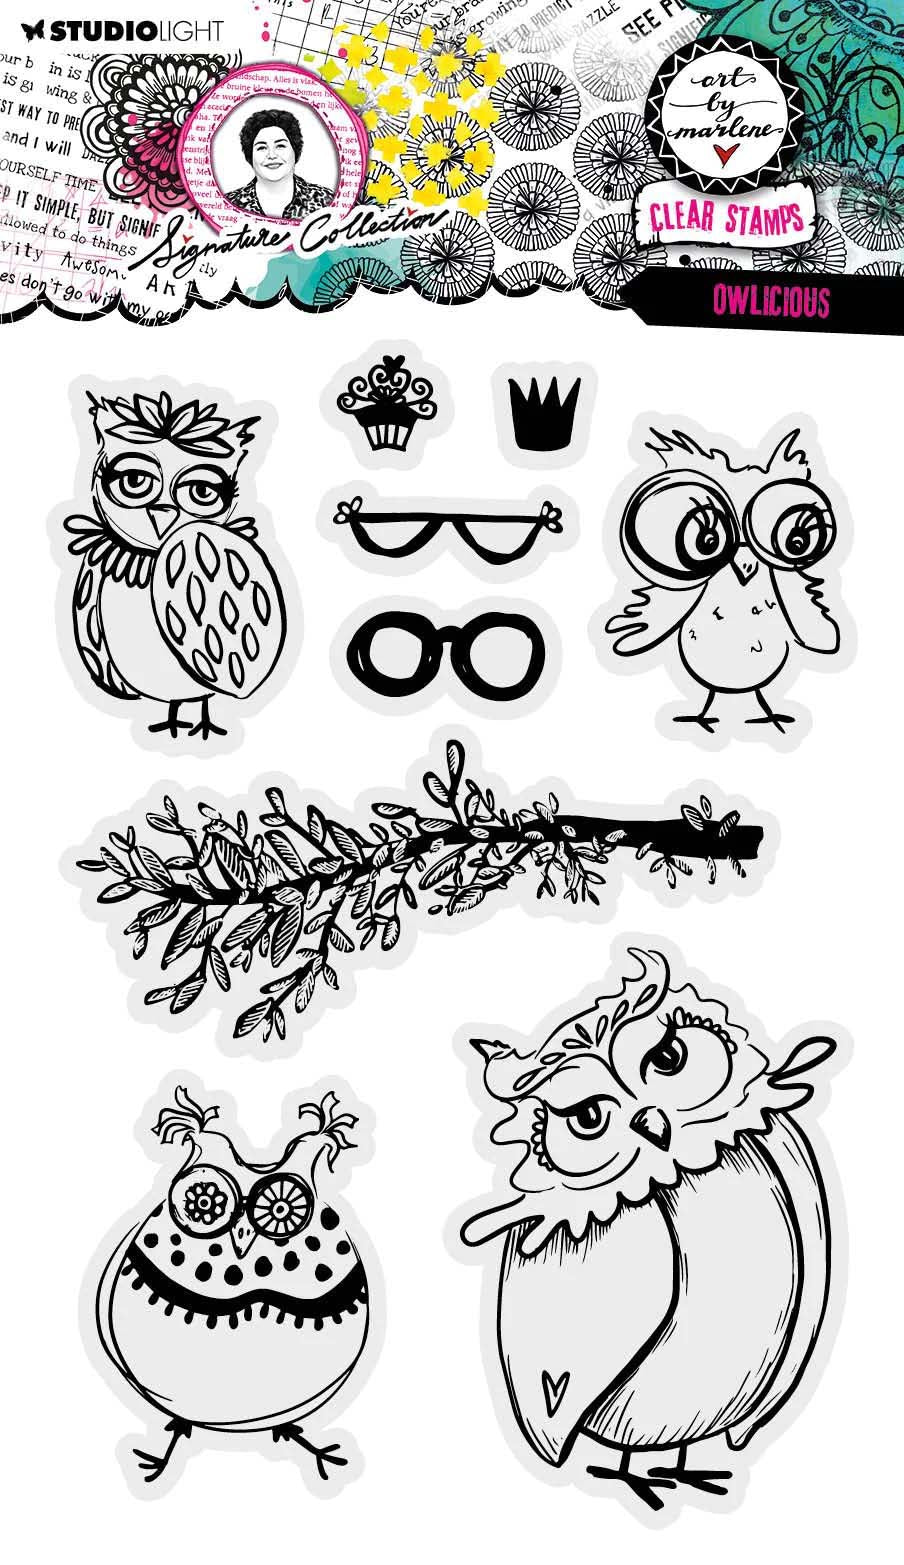 Art By Marlene  Clear Stamp  Owlicious  Signature Collection ABM-SI-STAMP637